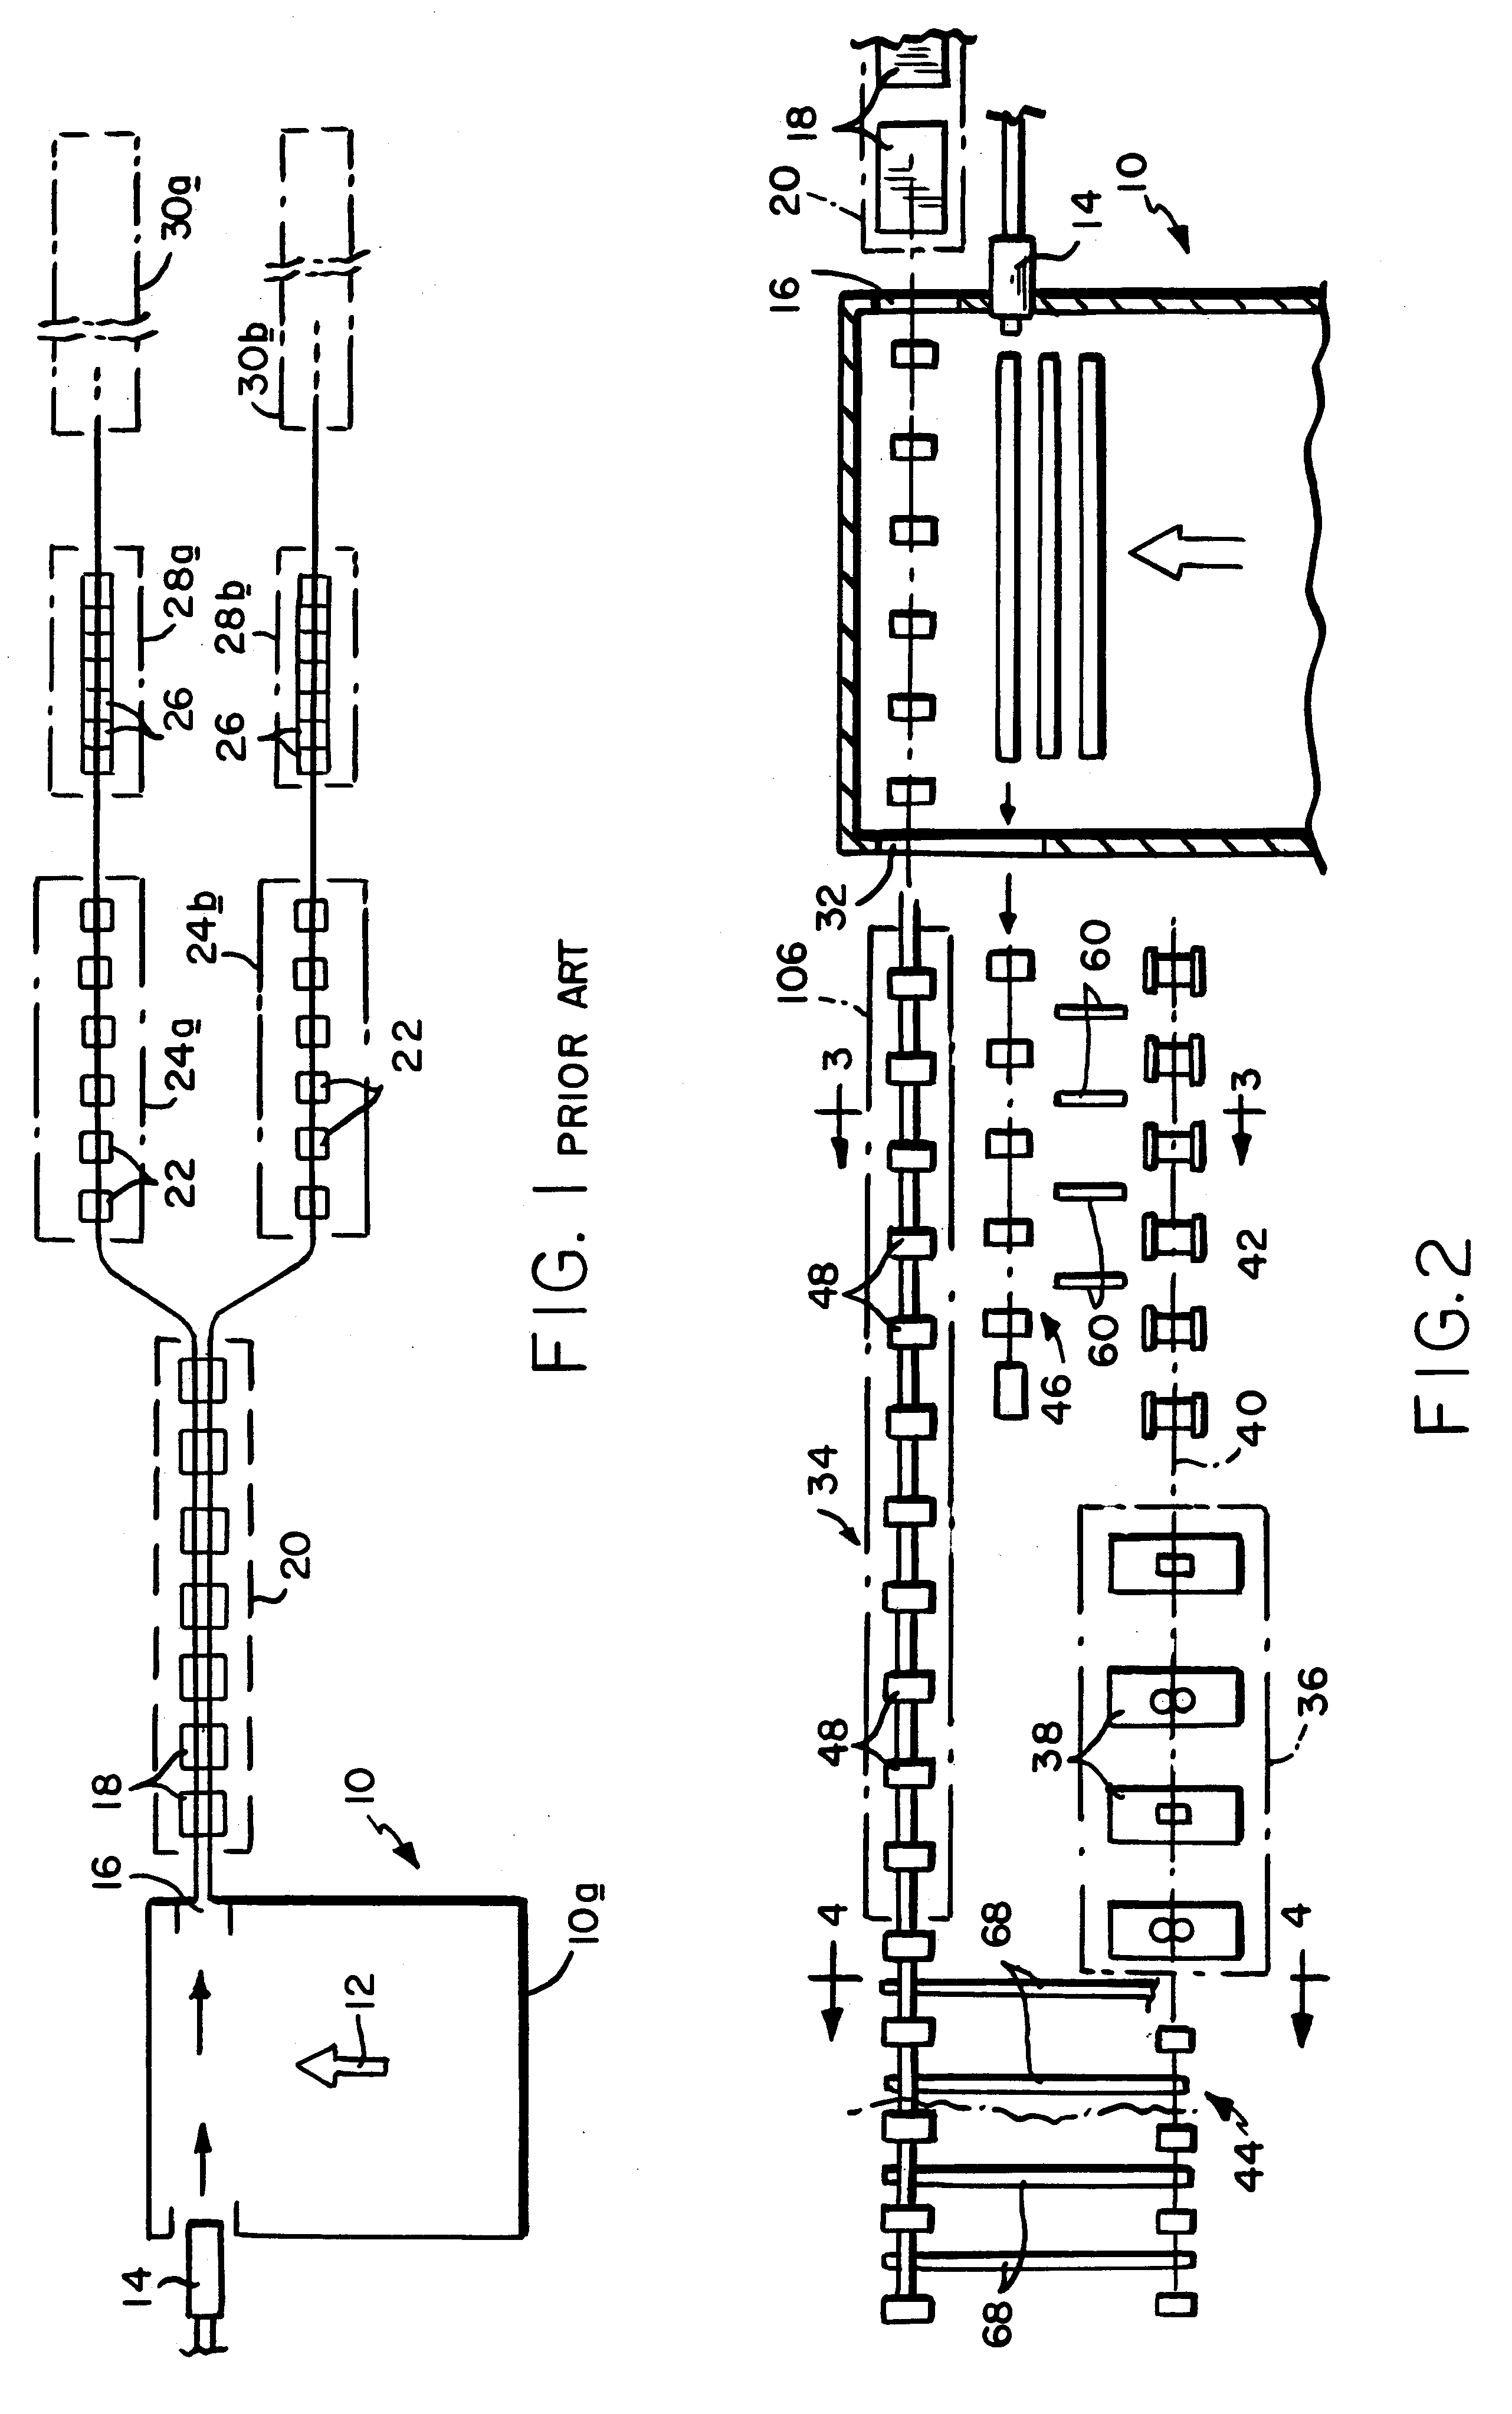 Apparatus for and method of processing billets in a rolling mill